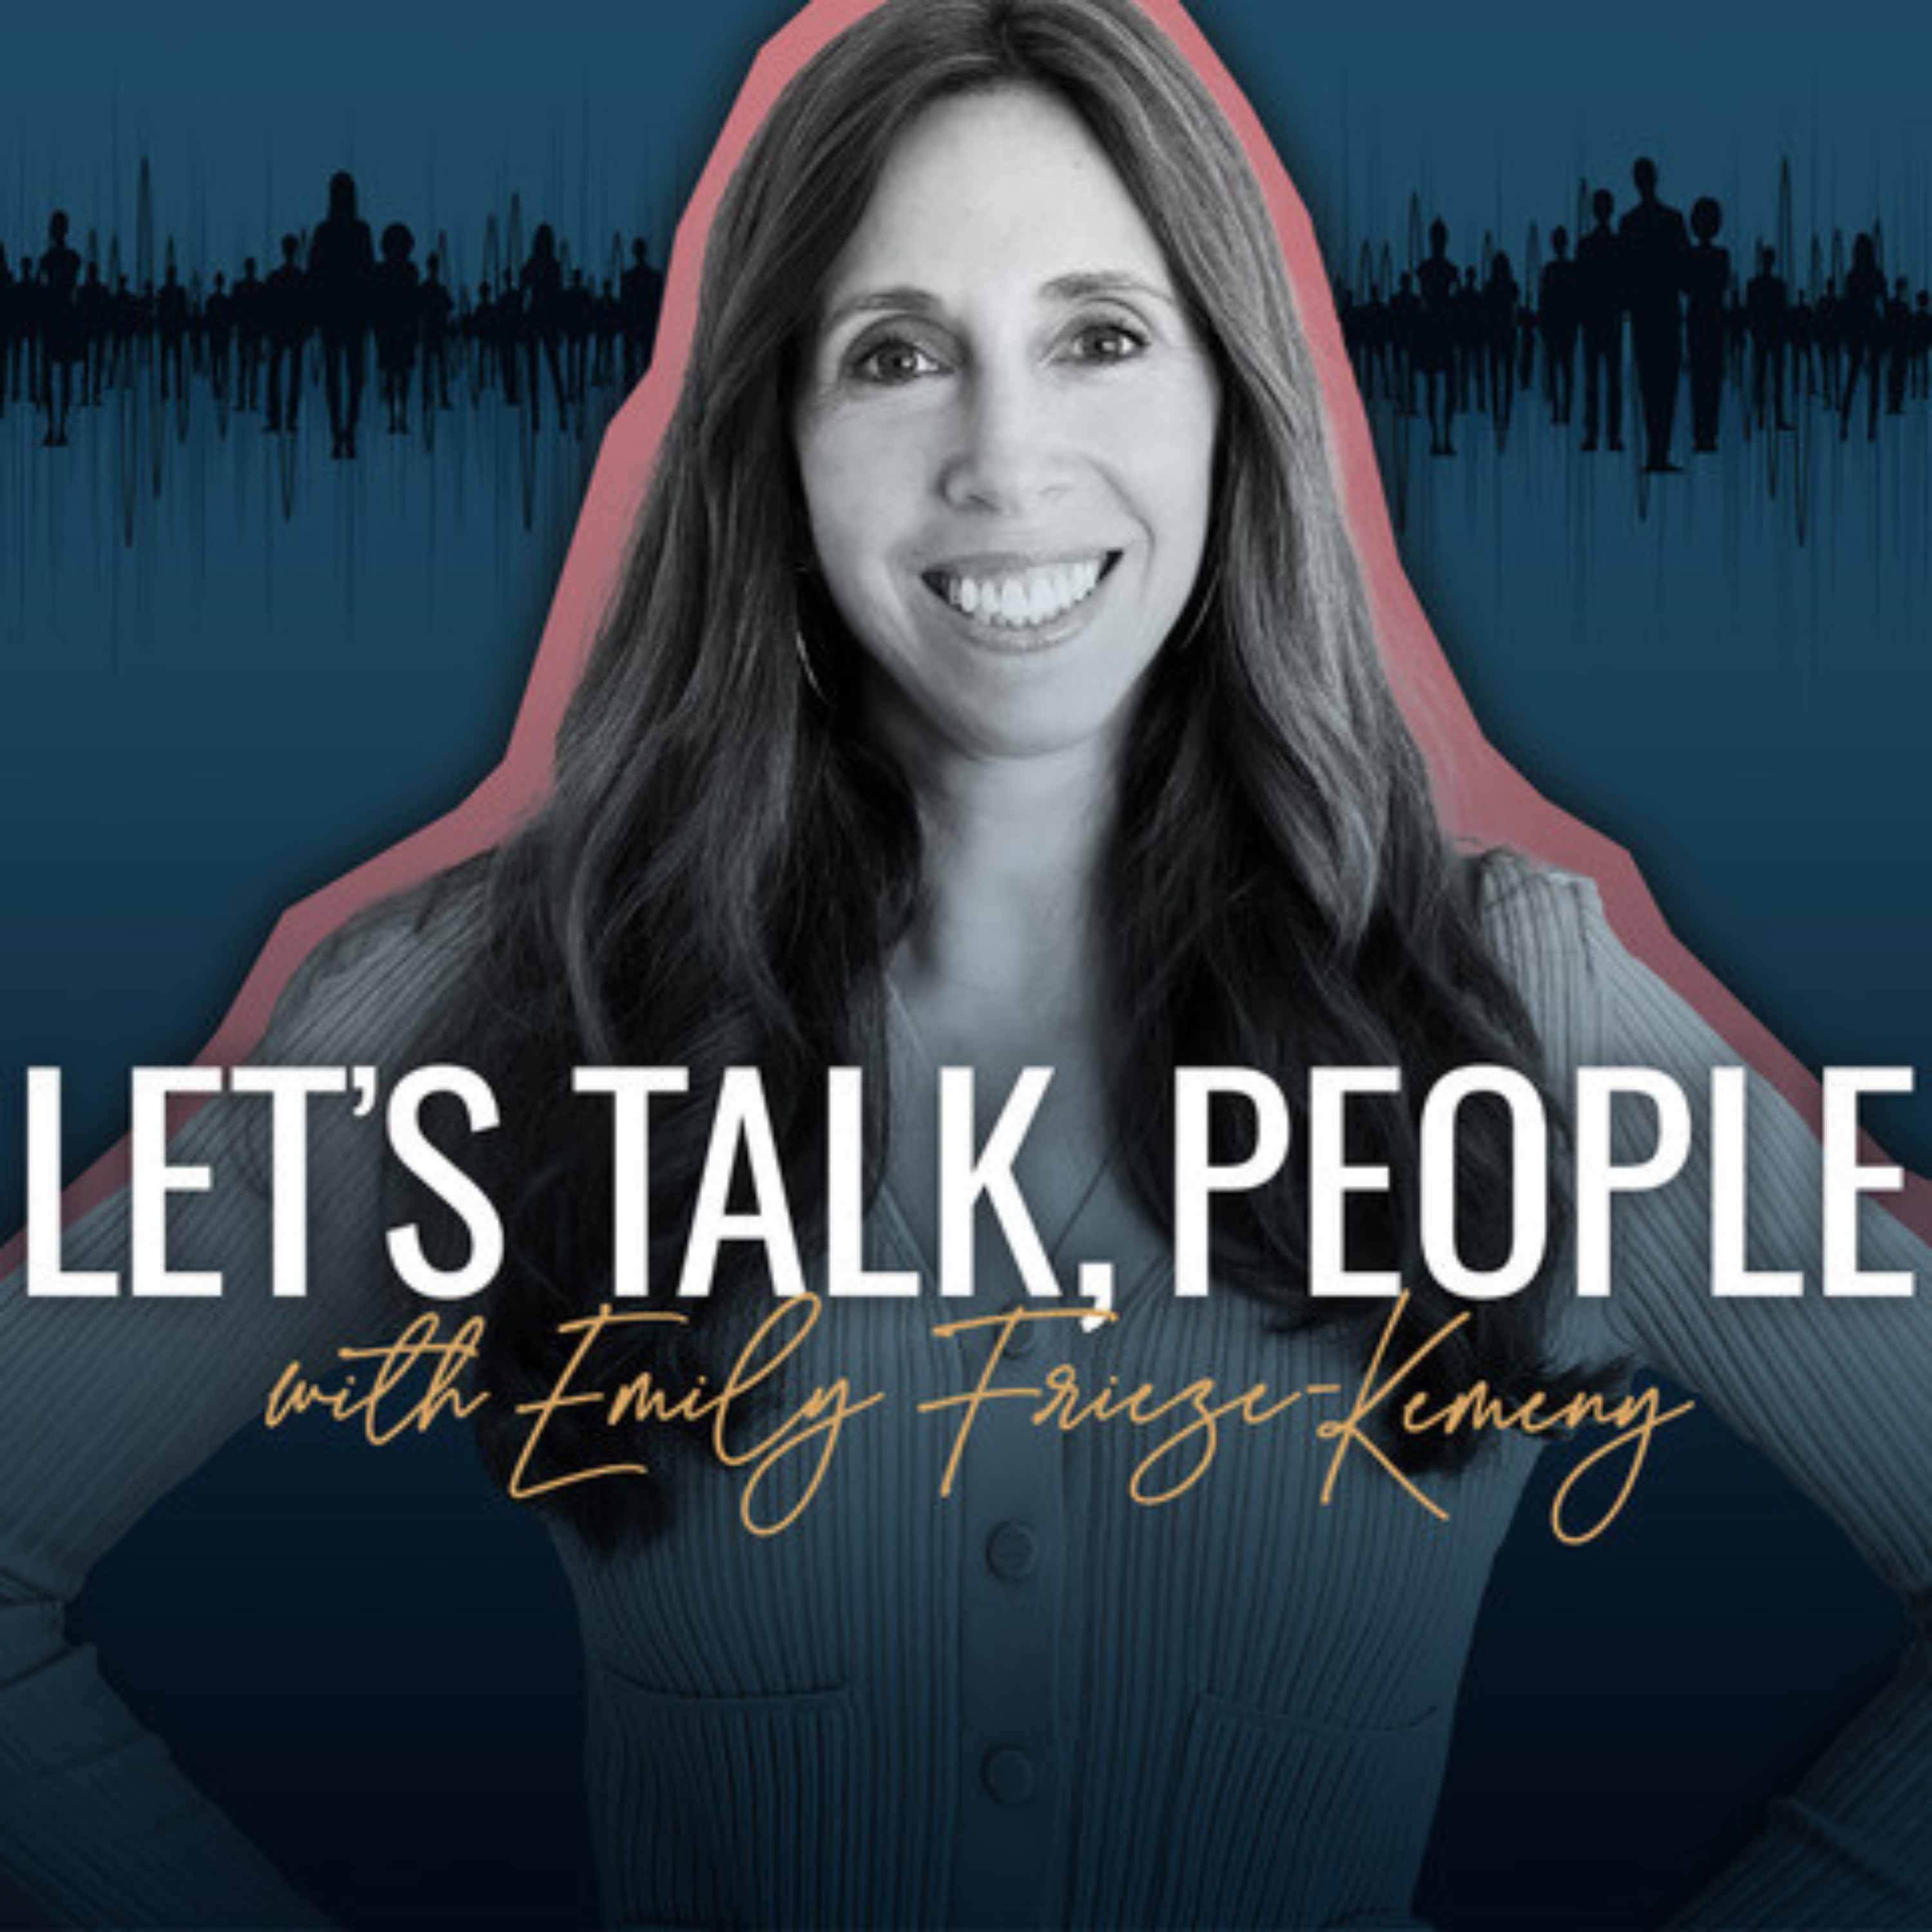 Artwork for Let's Talk, People with Emily Frieze-Kemeny